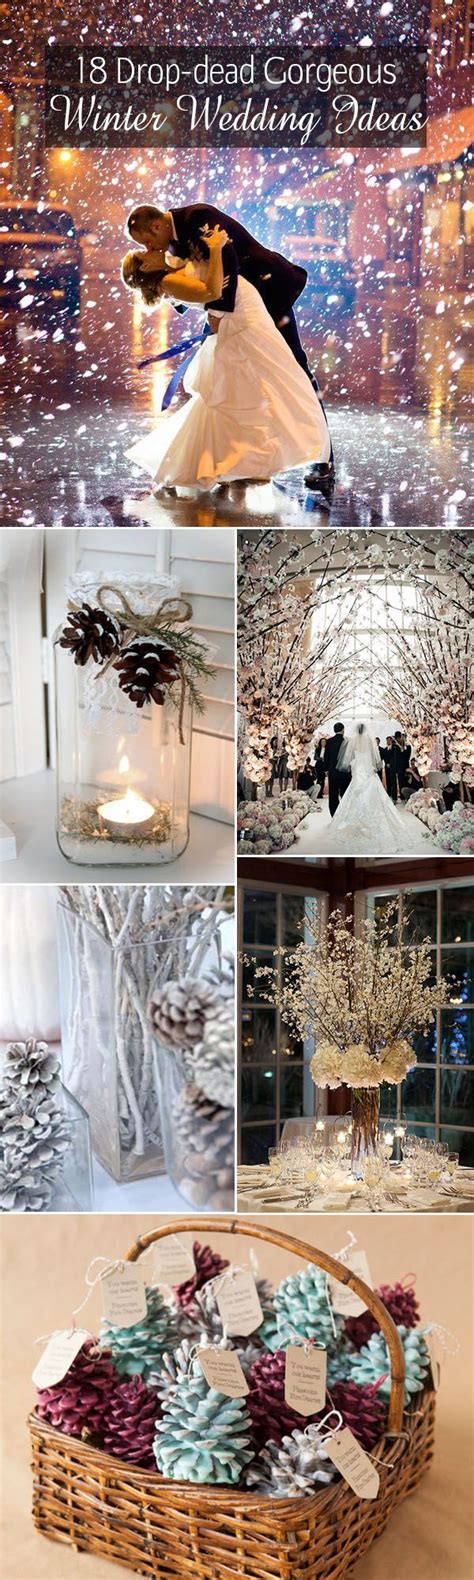 18 Winter Wedding Themes Pictures Photos And Images For